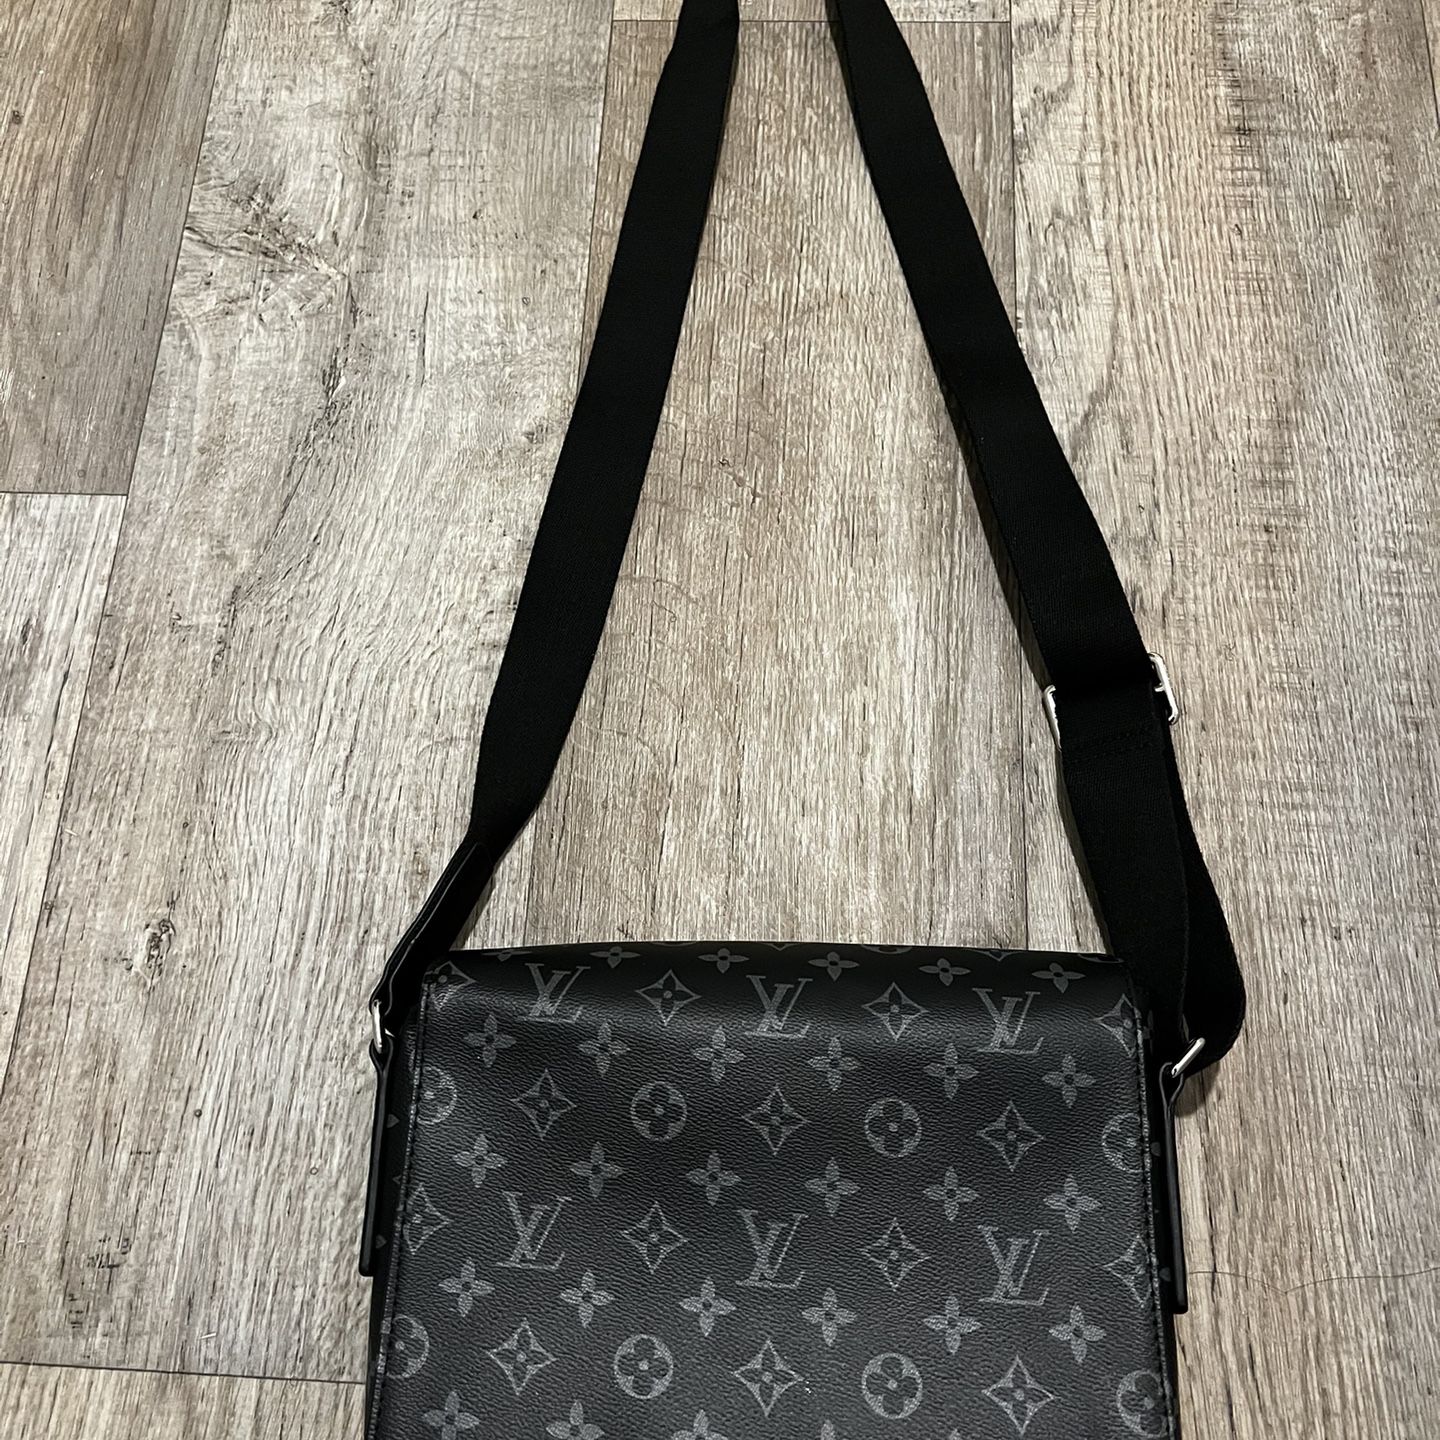 Authentic Louis Vuitton Leather Name Tag With Lock And Key Bag Charm for  Sale in Weston, MA - OfferUp